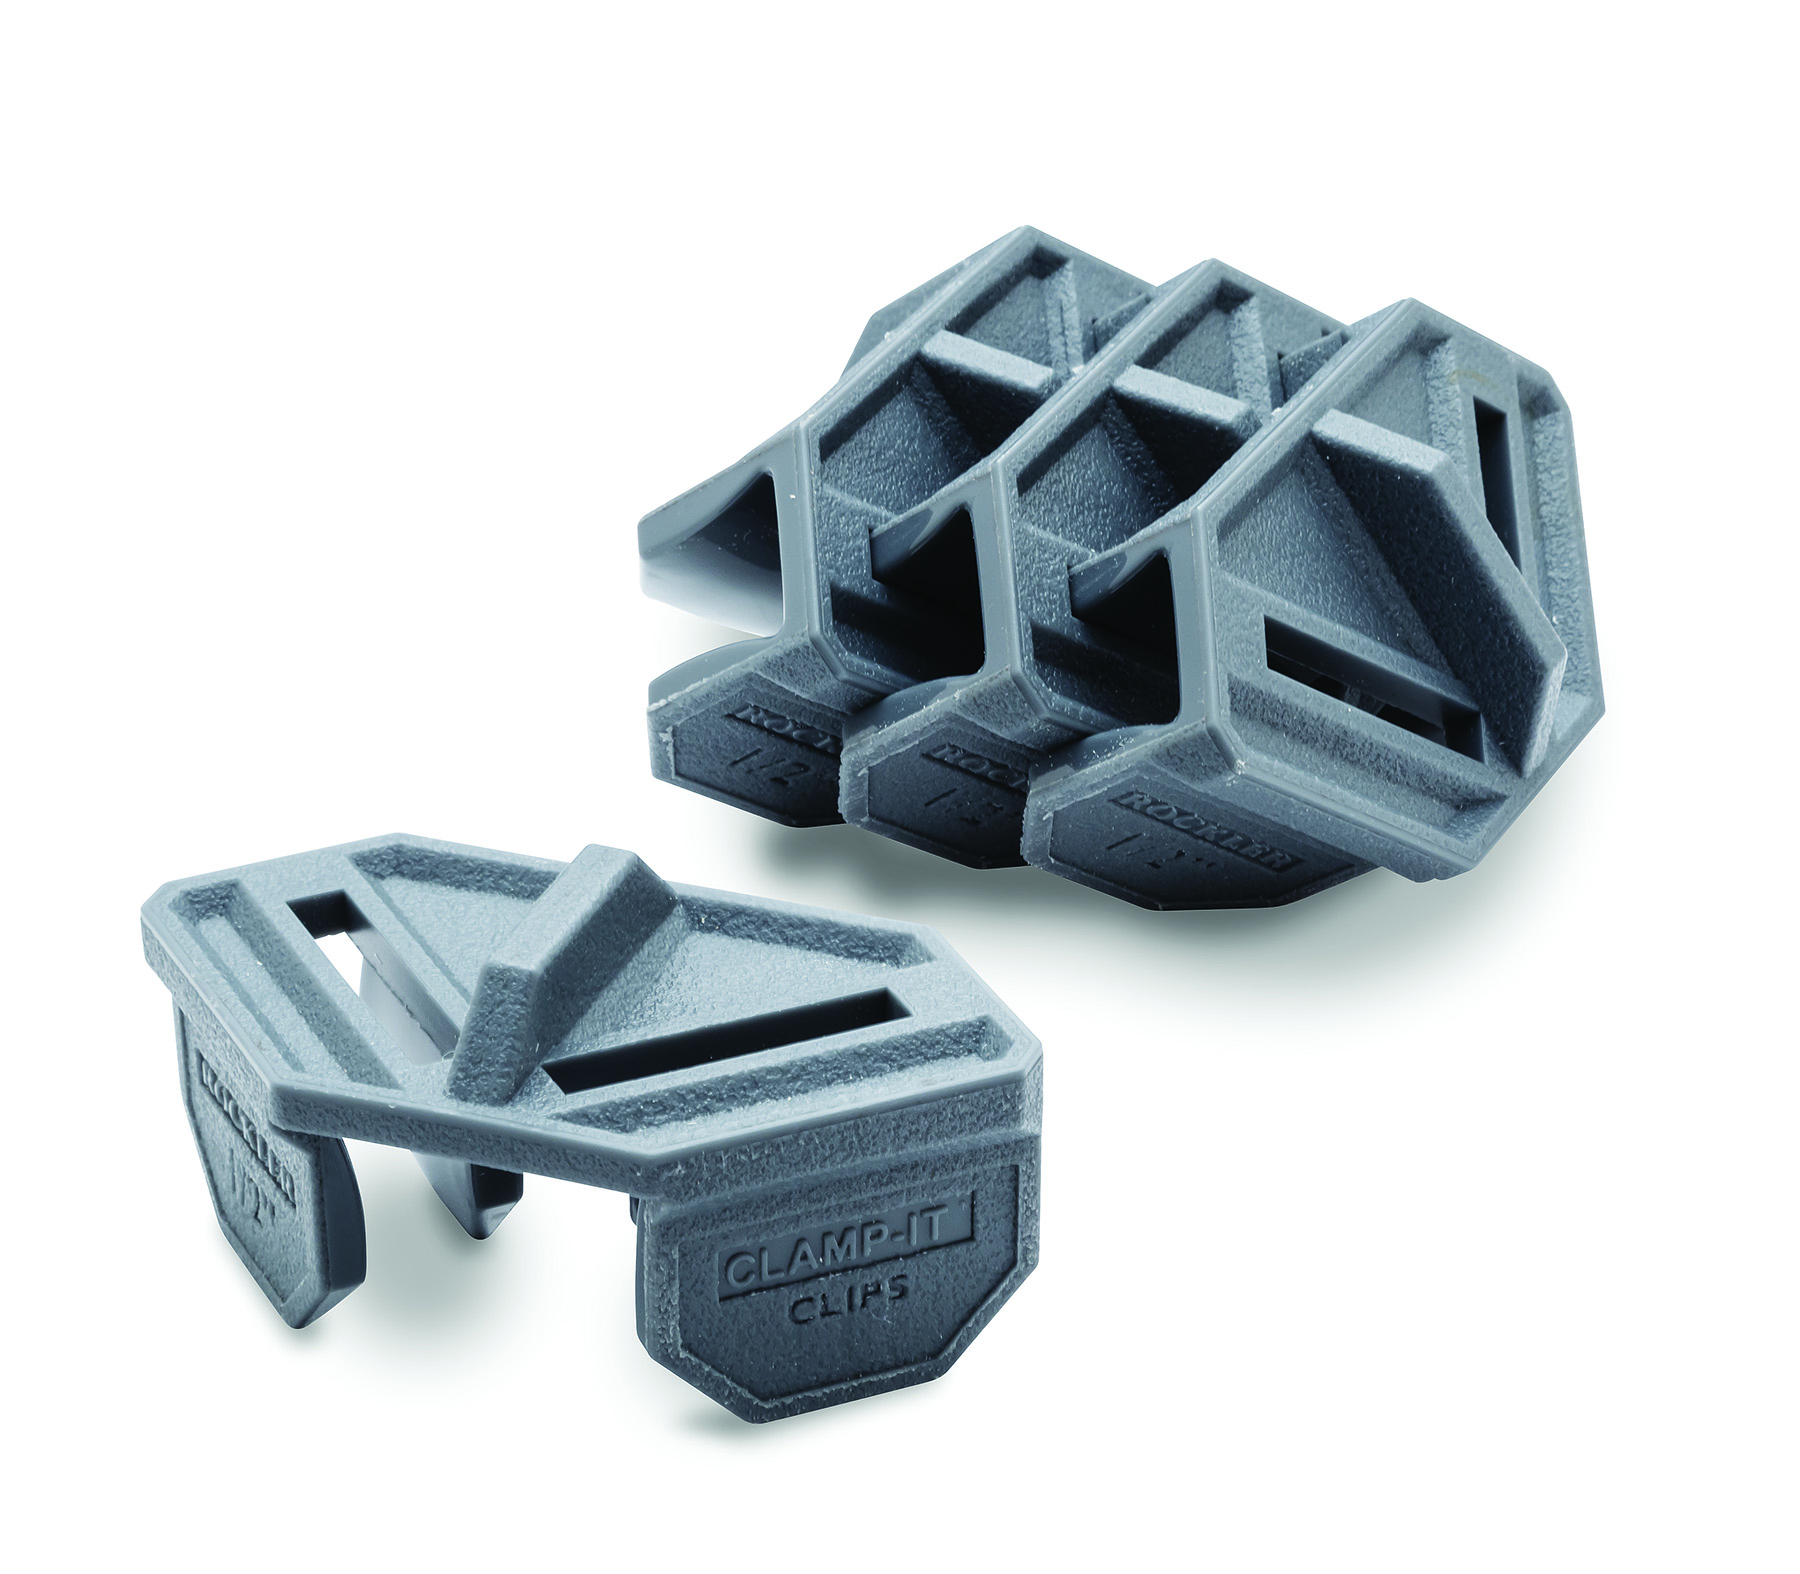 Clamp-It® Clips are available in two sizes, to fit 1/2" and 3/4" nominal stock. The 1/2" Clips are shown here.